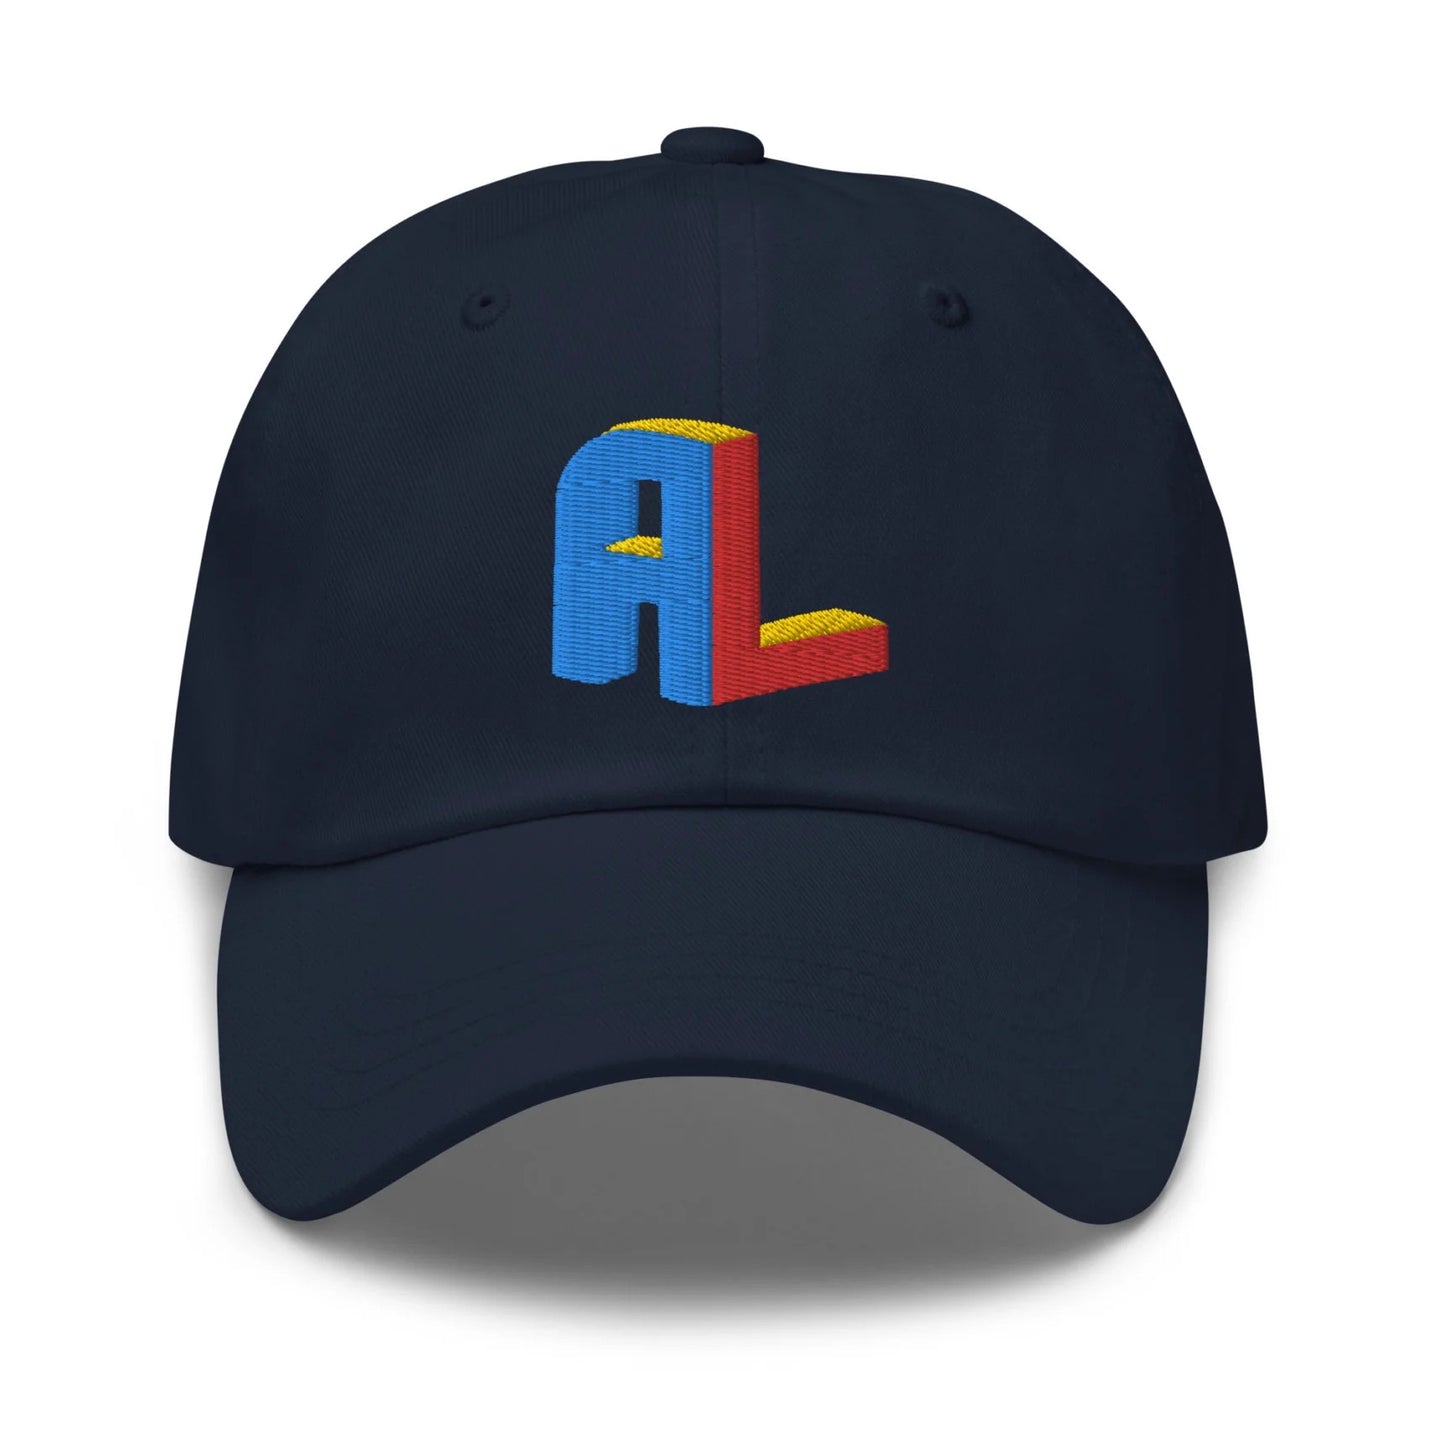 Ance Larmstrong ShowZone baseball dad hat in navy